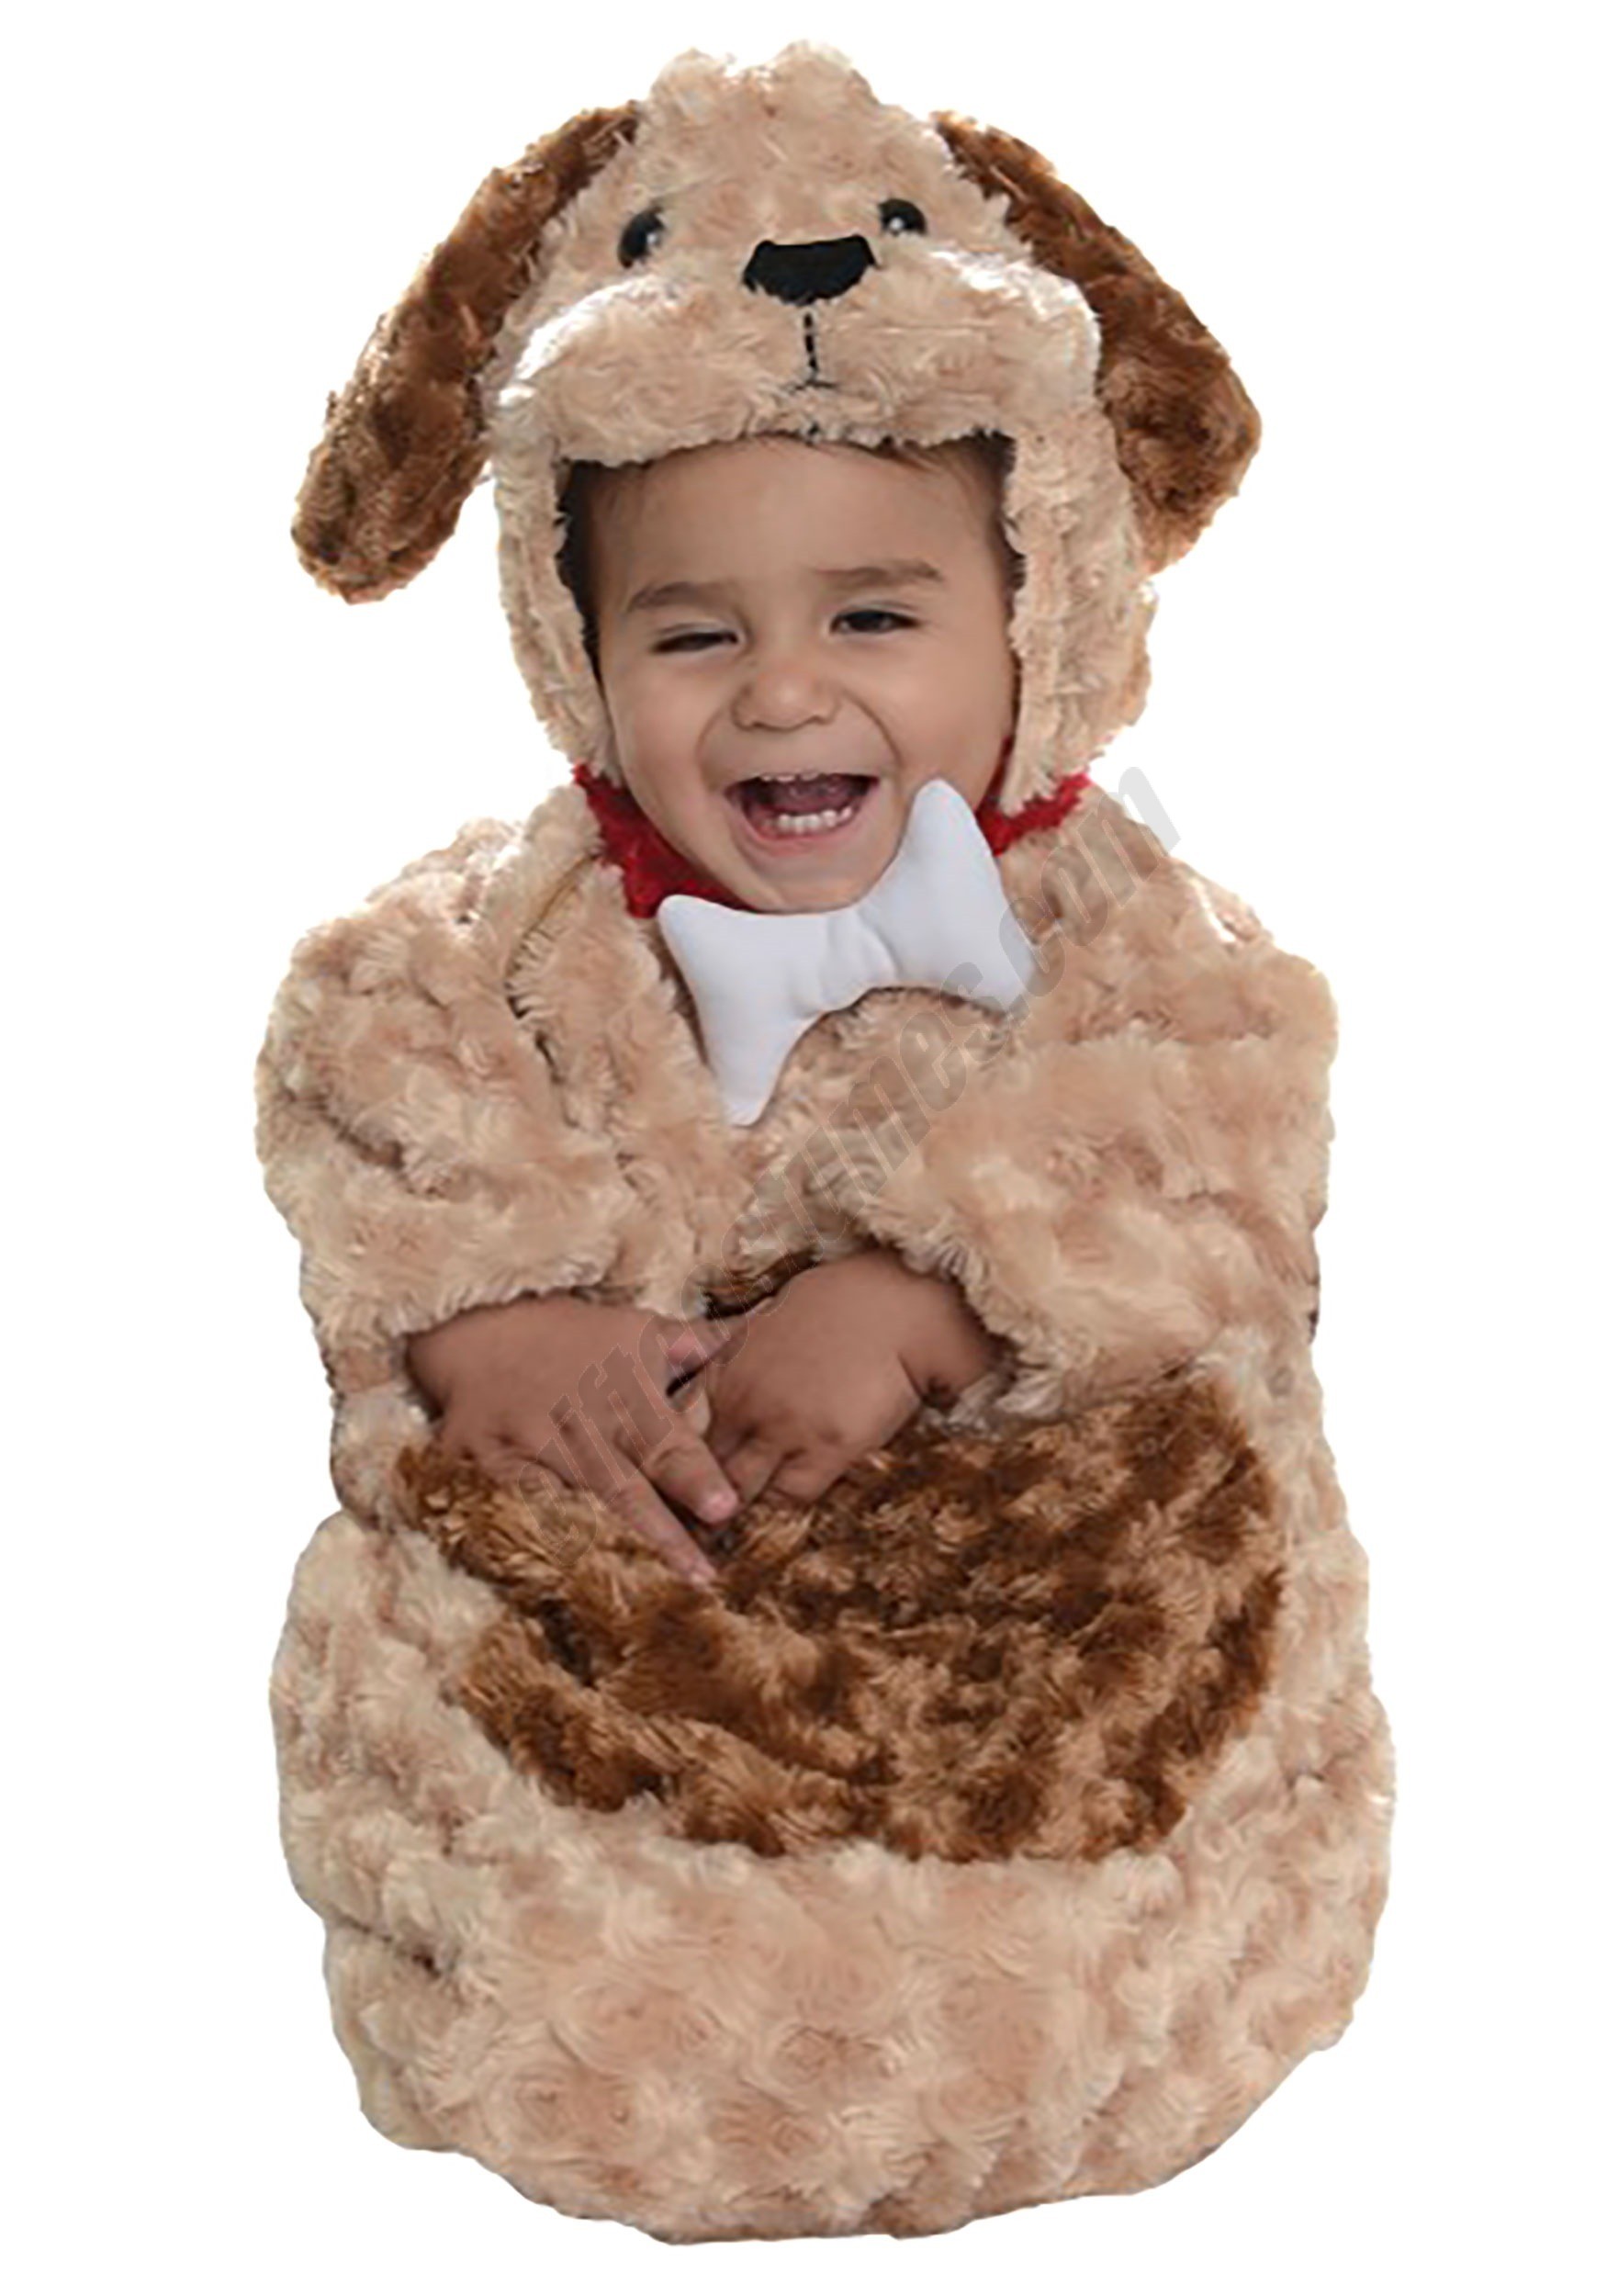 Puppy Bunting Costume for Infants Promotions - Puppy Bunting Costume for Infants Promotions